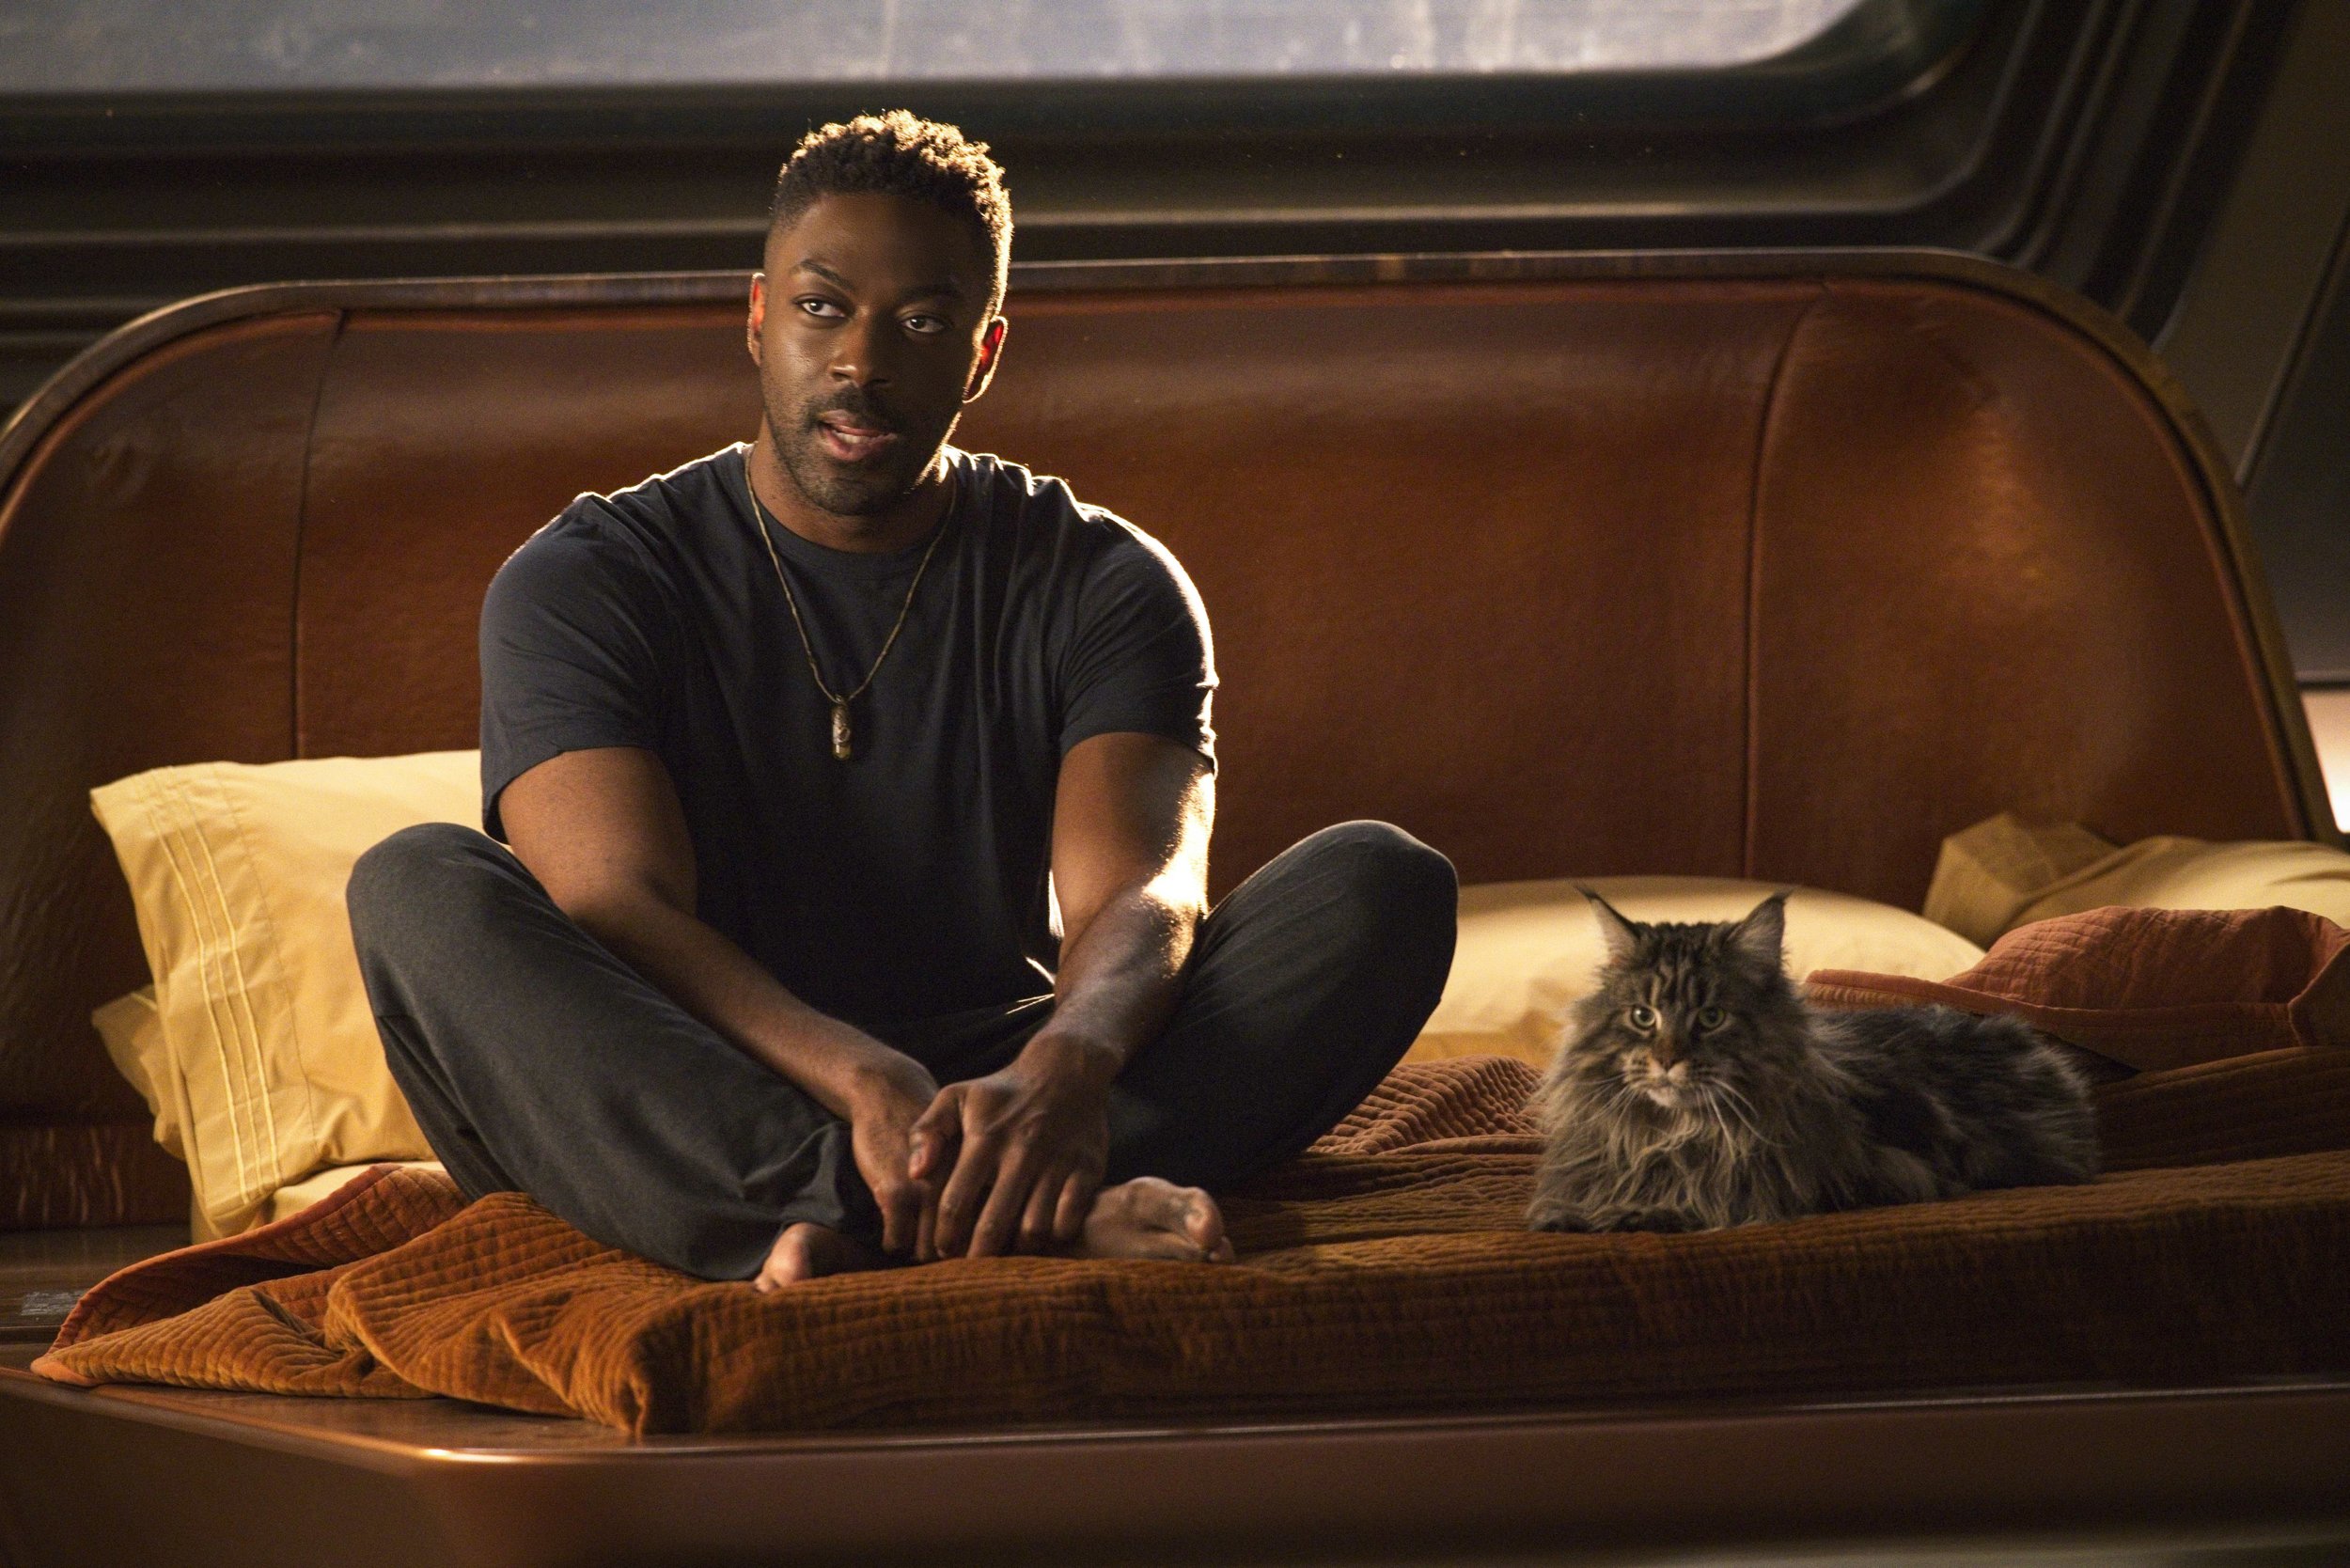   Pictured: David Ajala as Book and Grudge the cat of the Paramount+ original series STAR TREK: DISCOVERY. Photo Cr: Michael Gibson/Paramount+ (C) 2021 CBS Interactive. All Rights Reserved.  